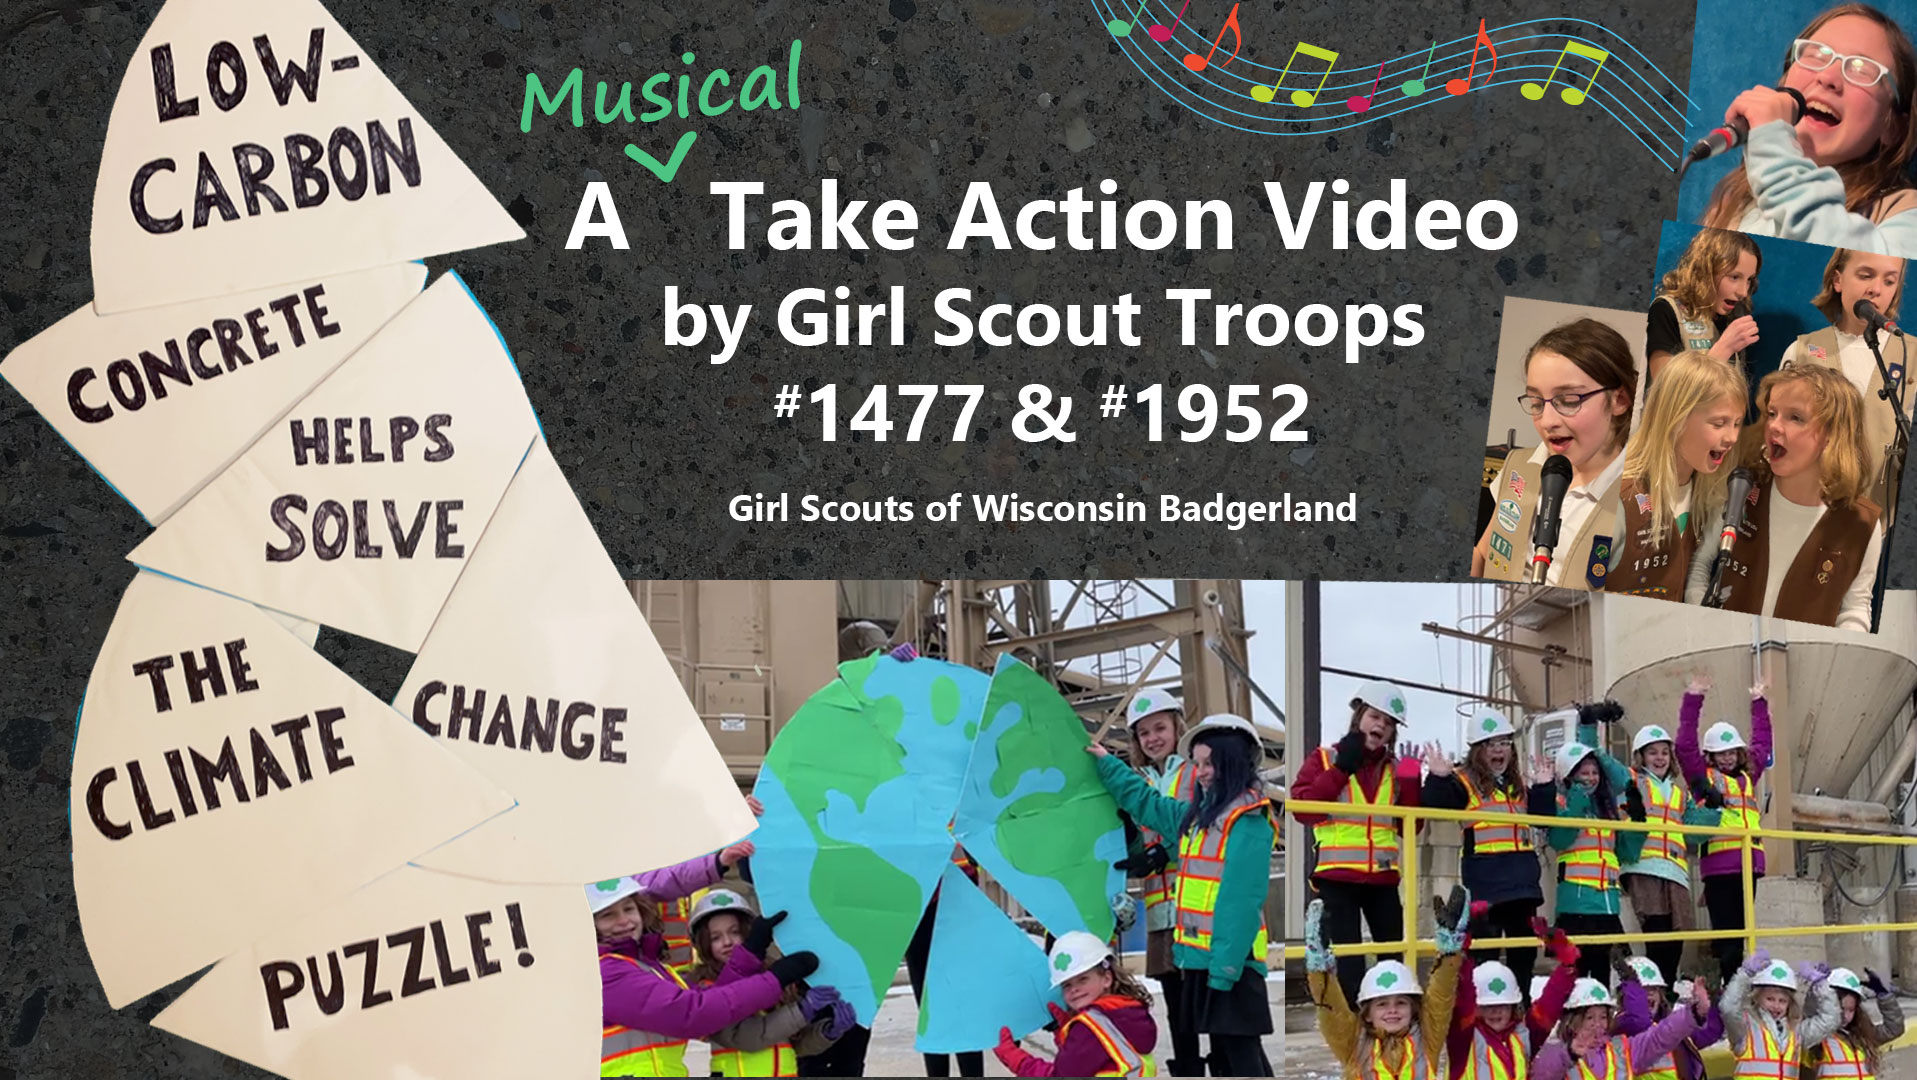 The cover to the Scouts' music video